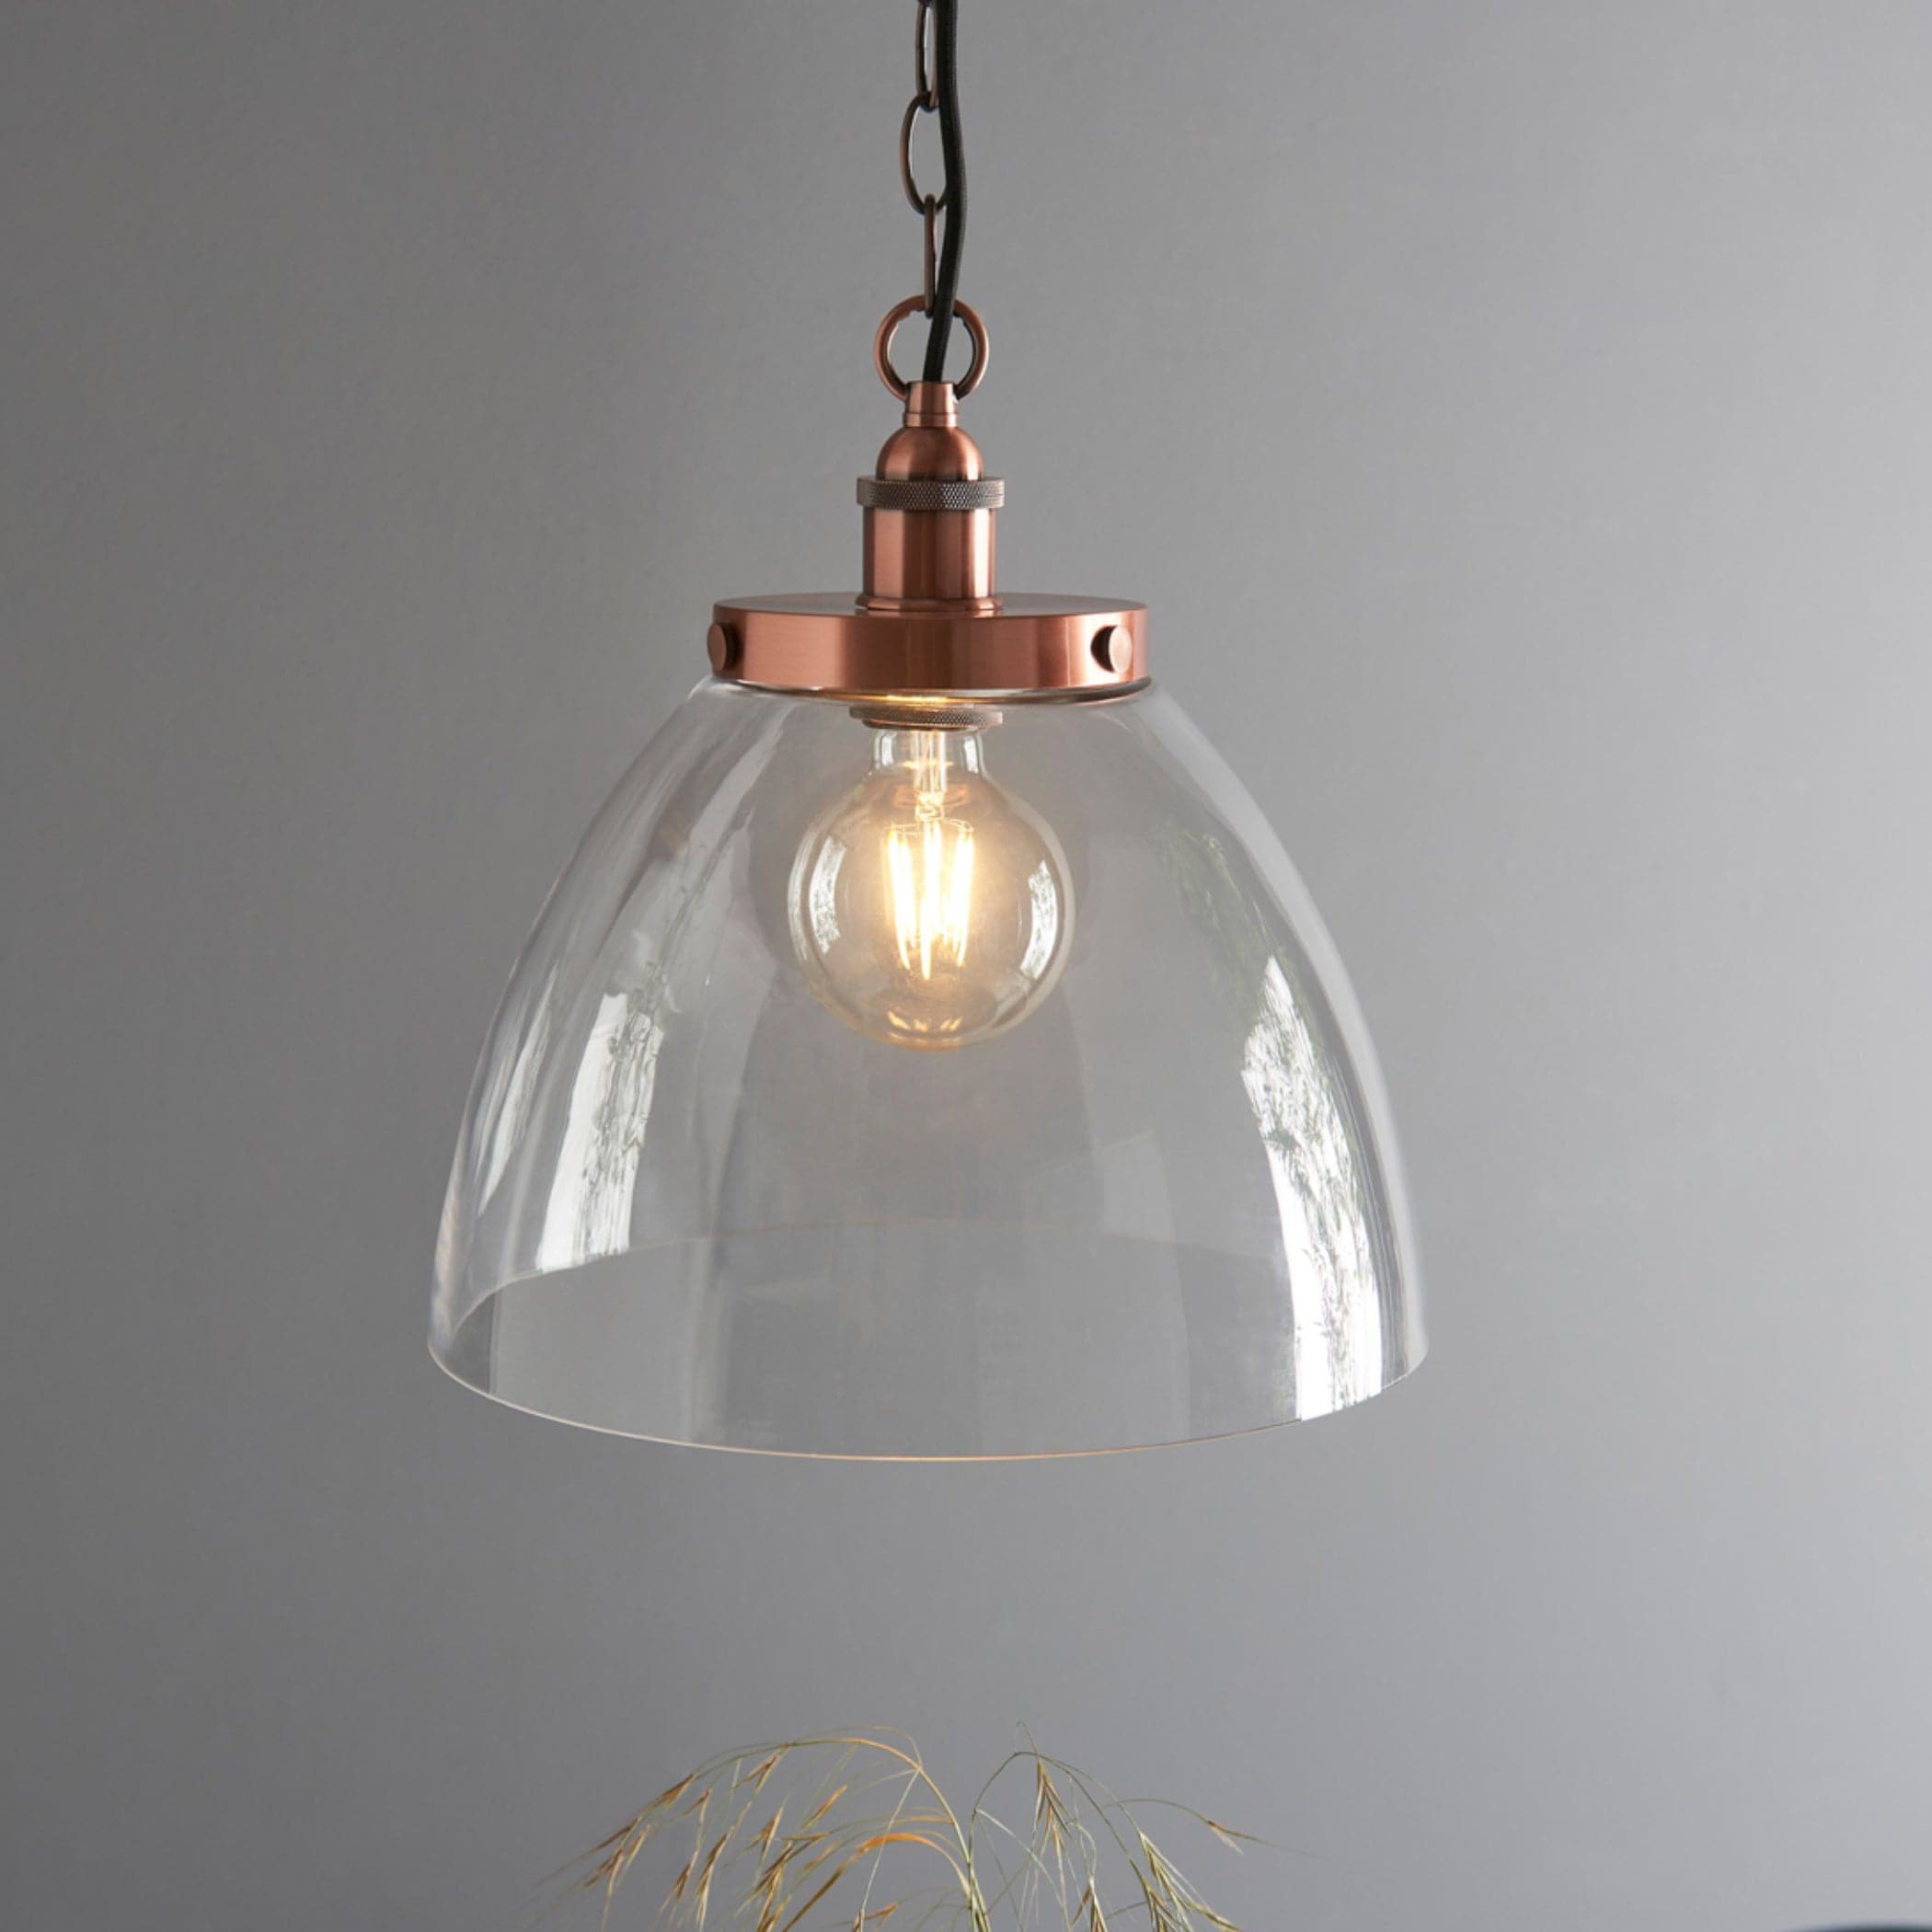 Large Glass Dome & Aged Copper Pendant Light